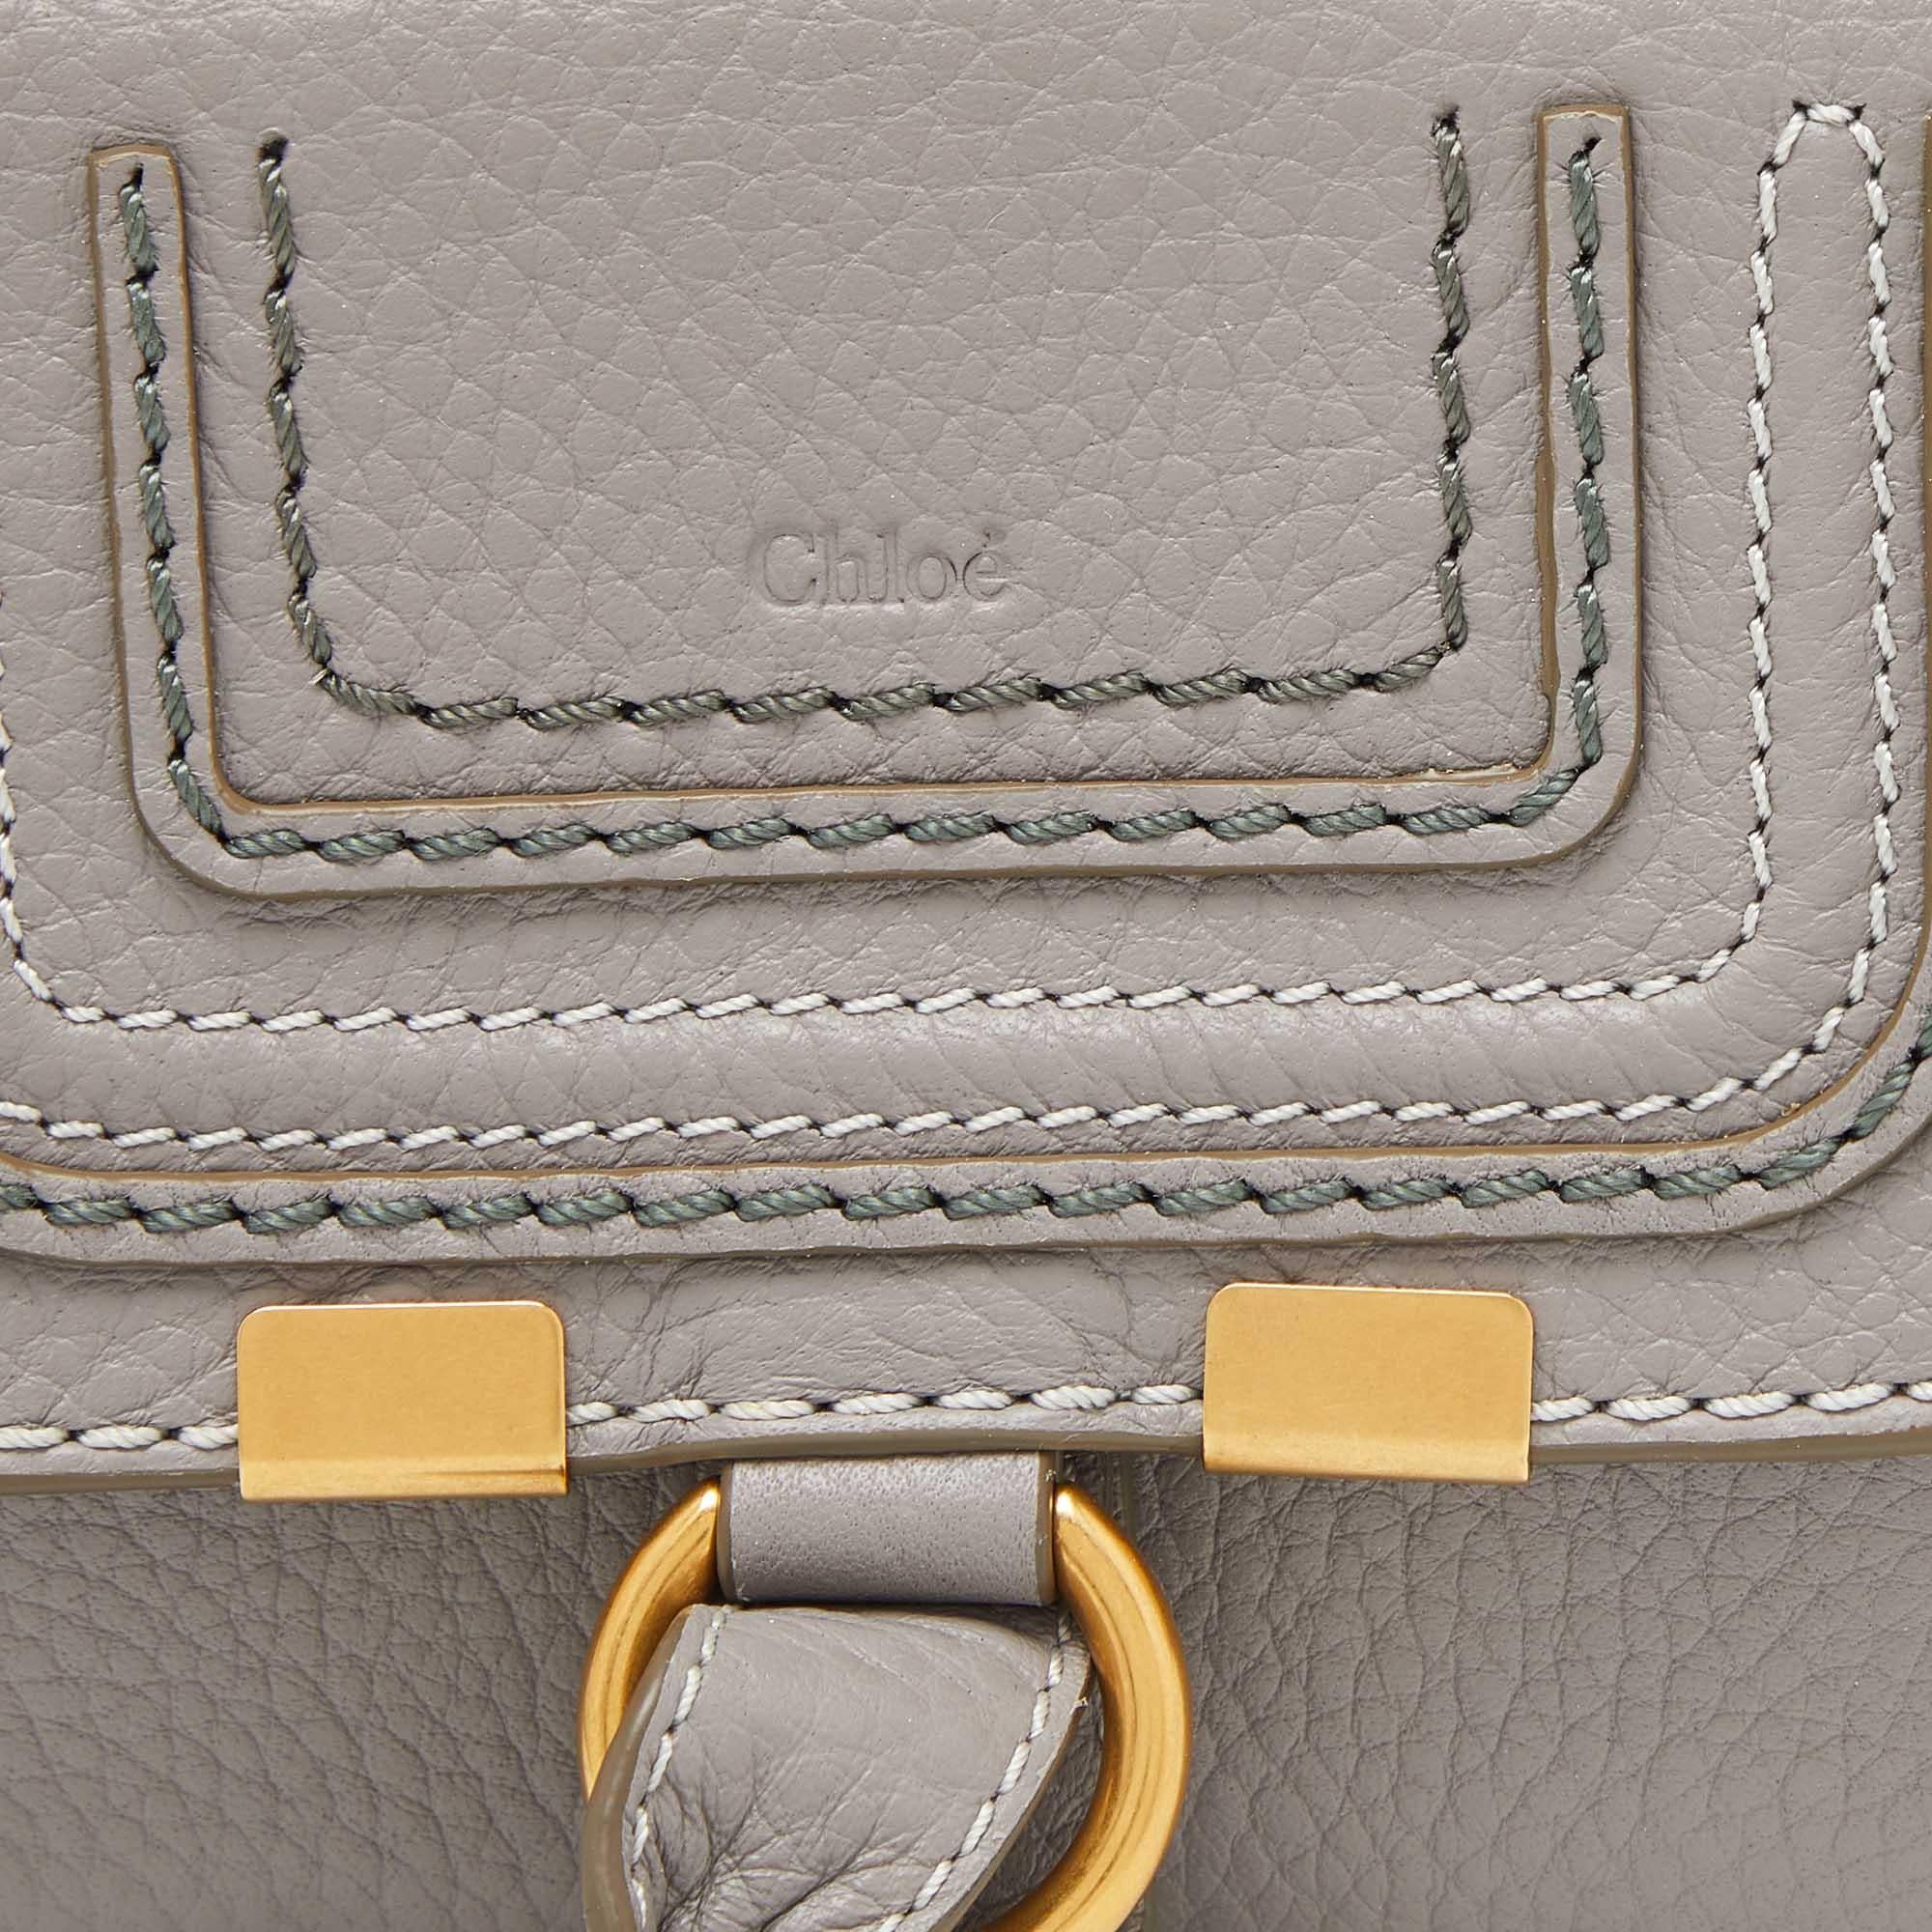 Chloe Grey Leather Marcie Compact Wallet 3